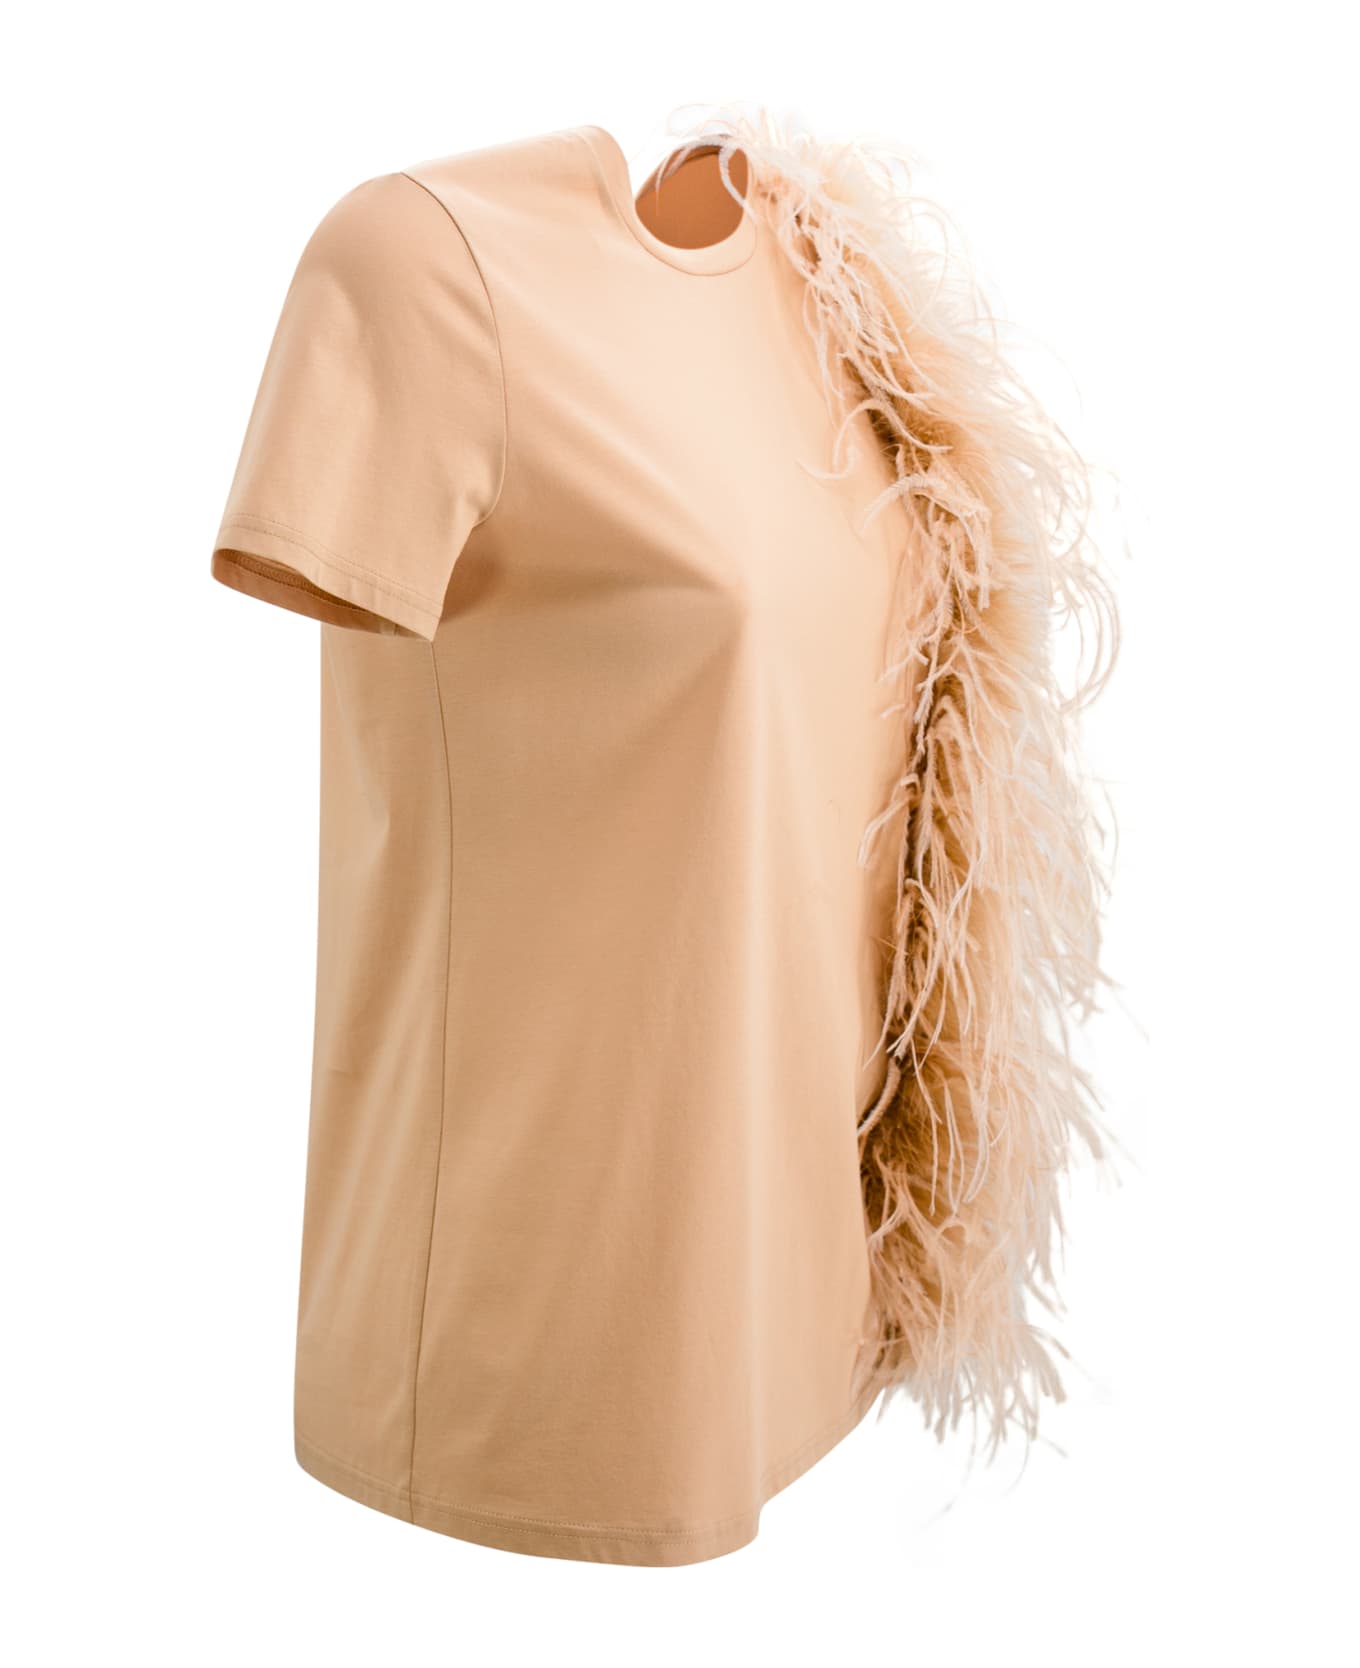 Max Mara Studio Jersey T-shirt With Feathers - Brown